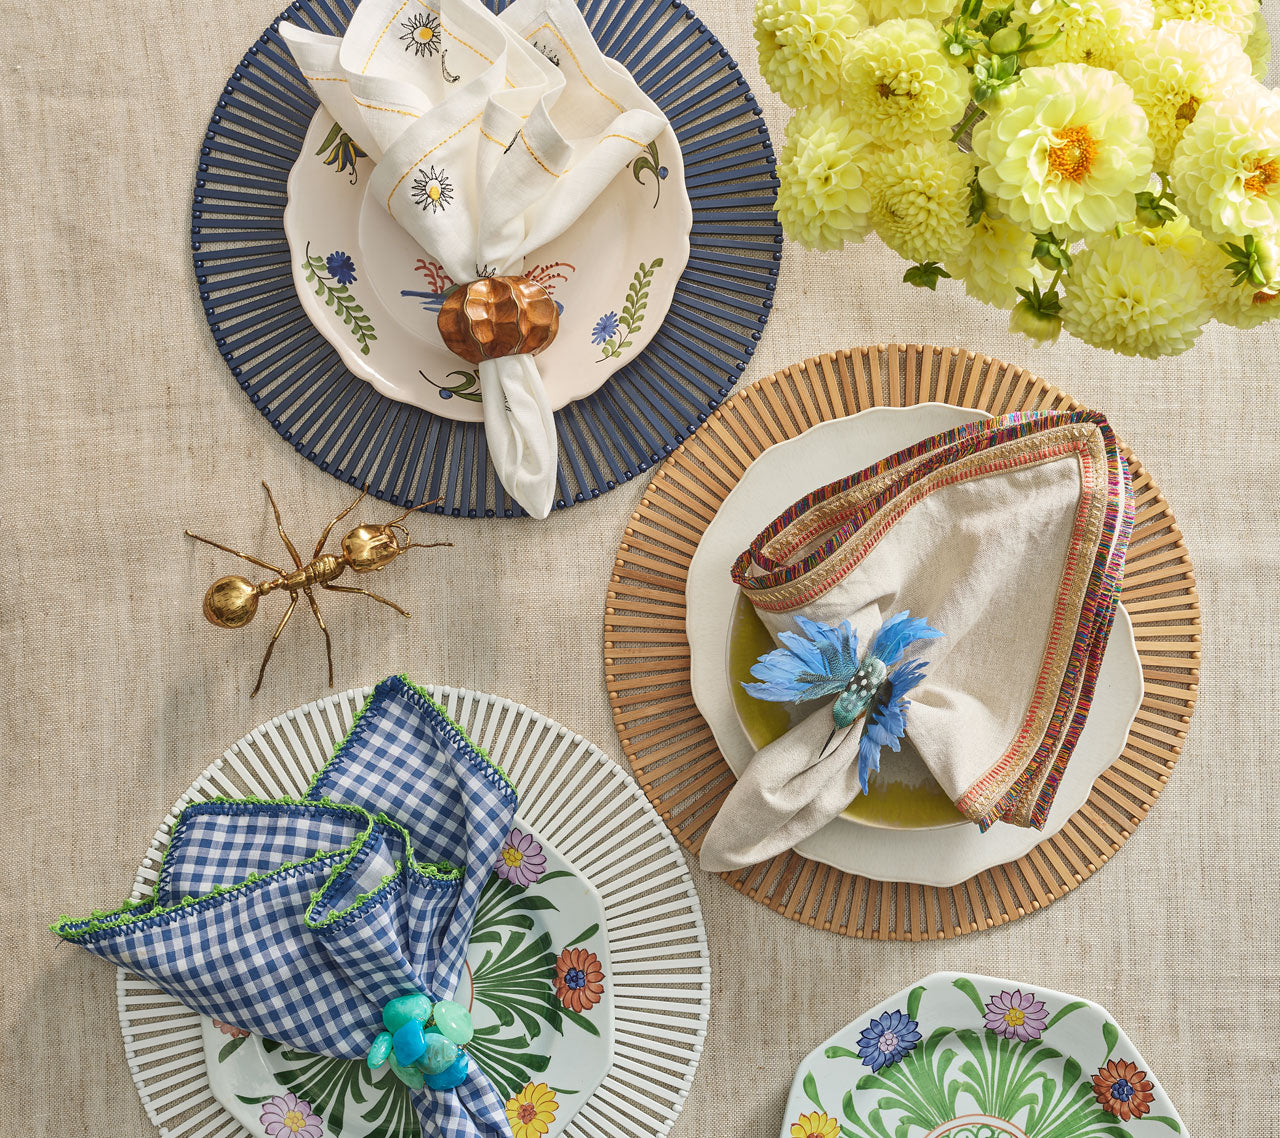 Kim Seybert's Bamboo Spoke Placemat in White, Navy or Natural